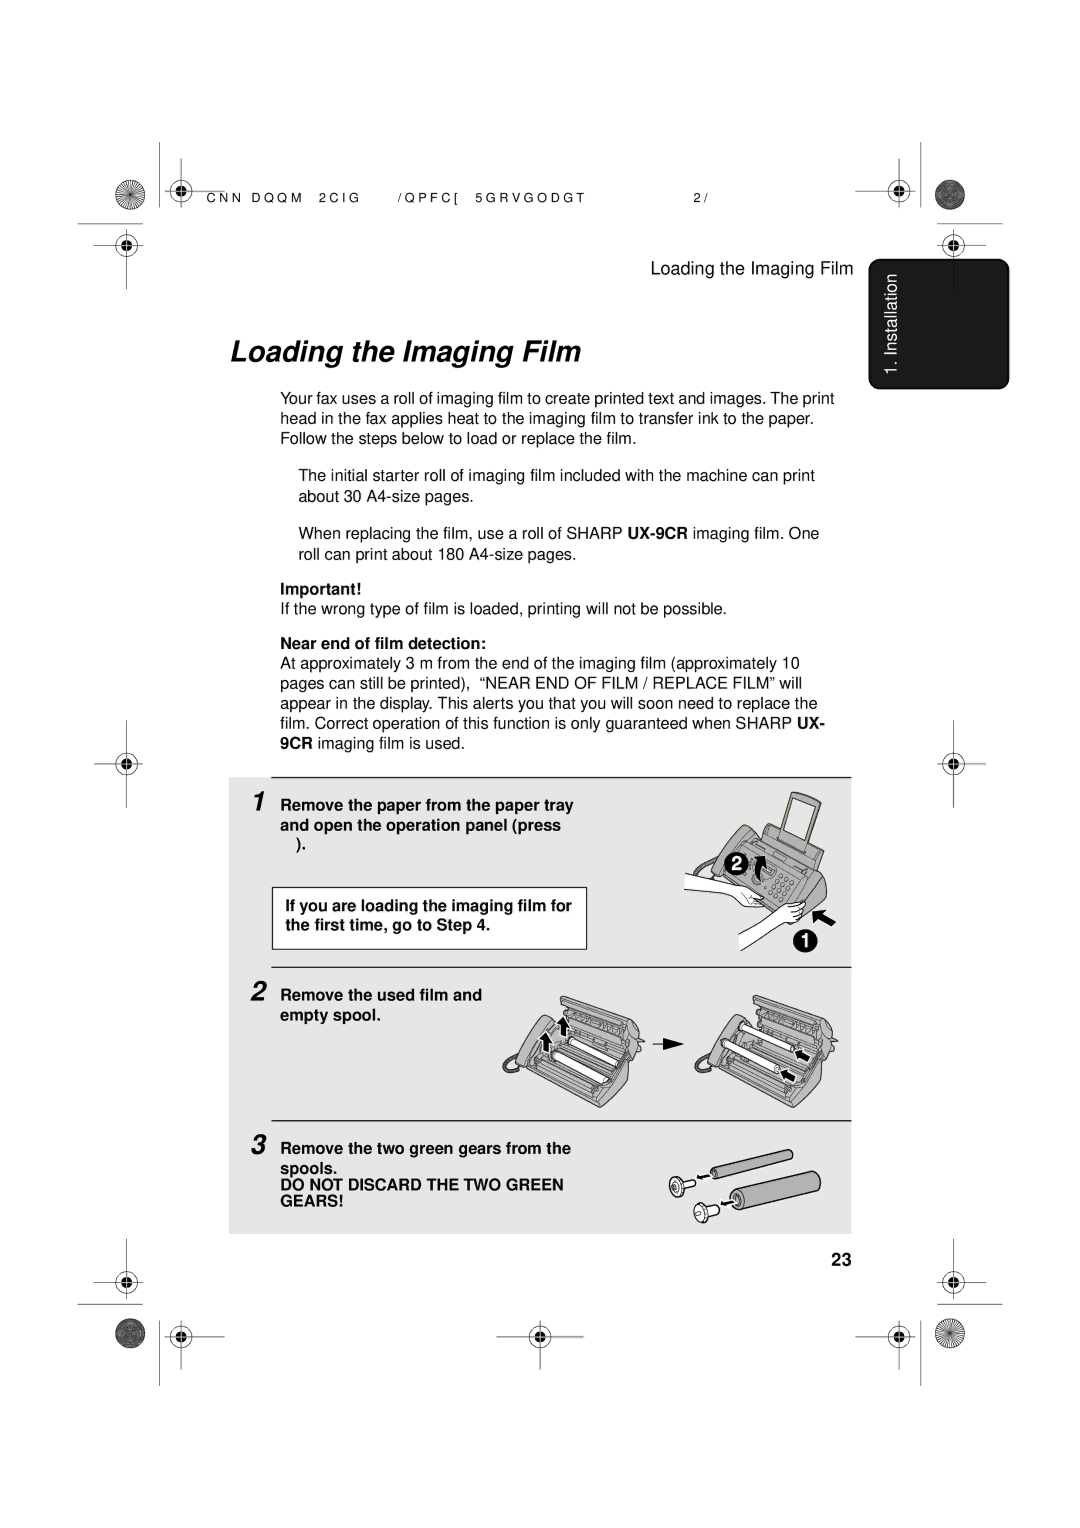 Sharp UX-D50 manual Loading the Imaging Film, Near end of film detection 